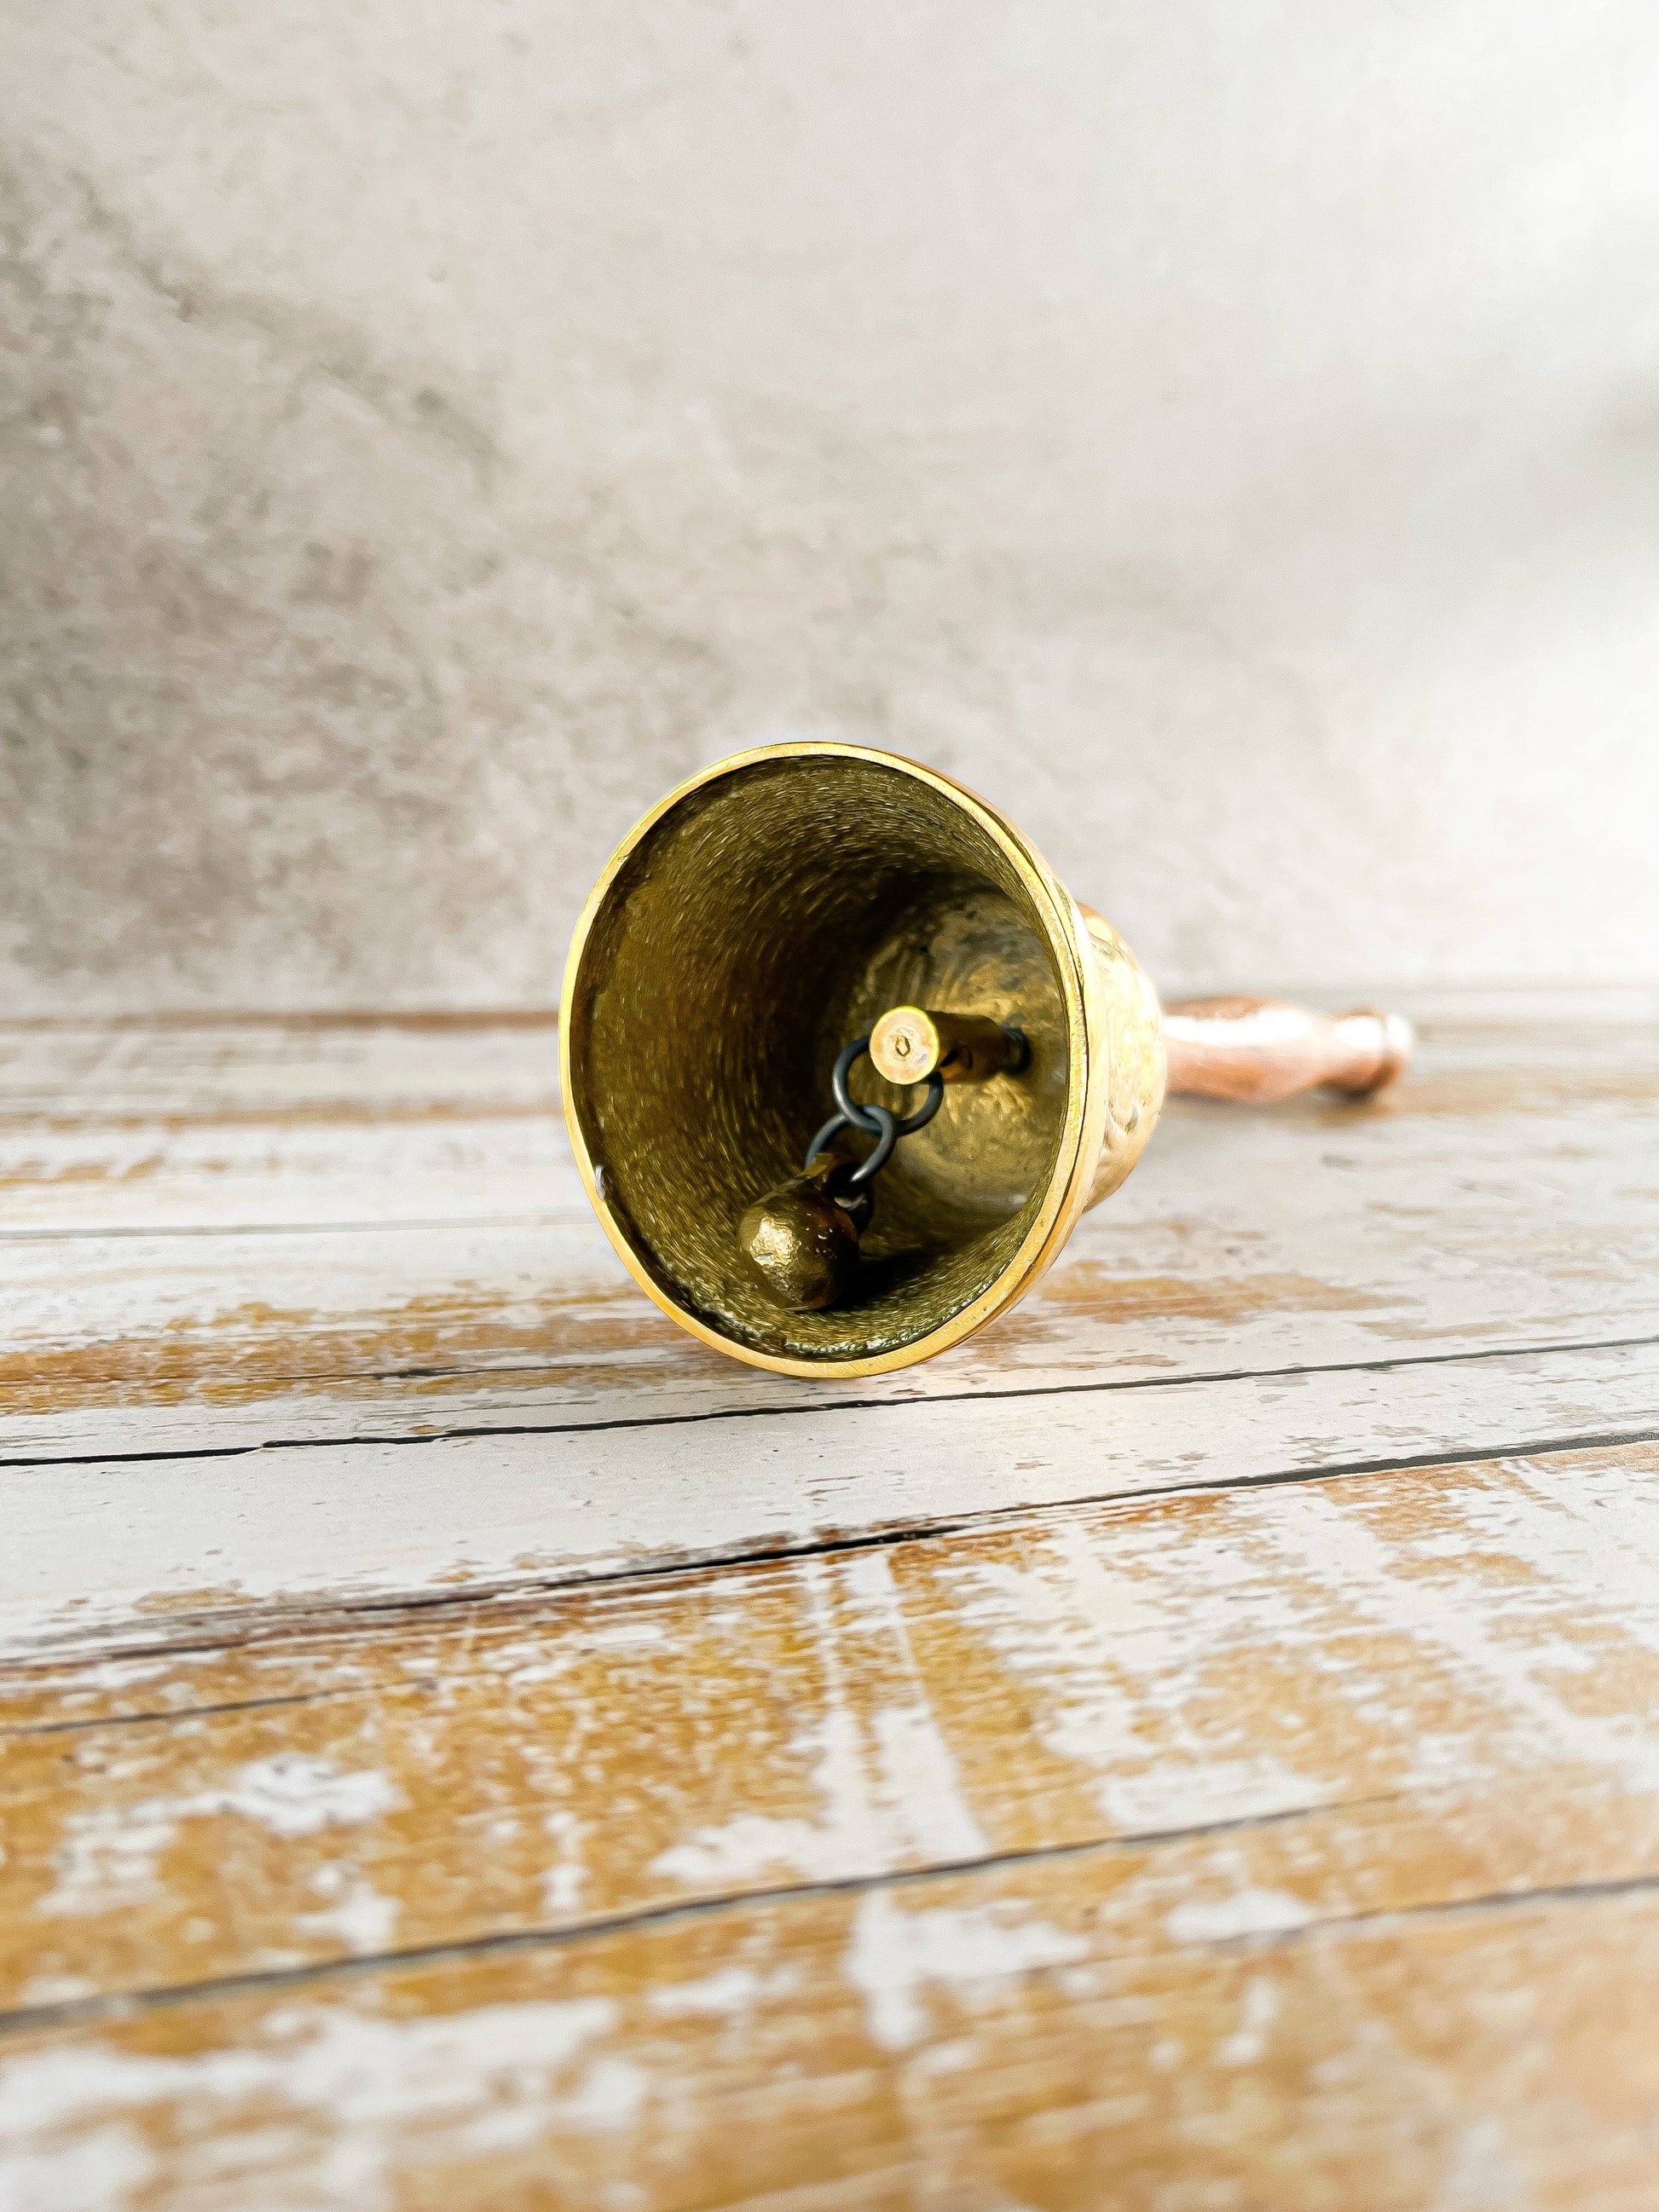 Vintage Brass Bell with Wooden Handle - SOSC Home